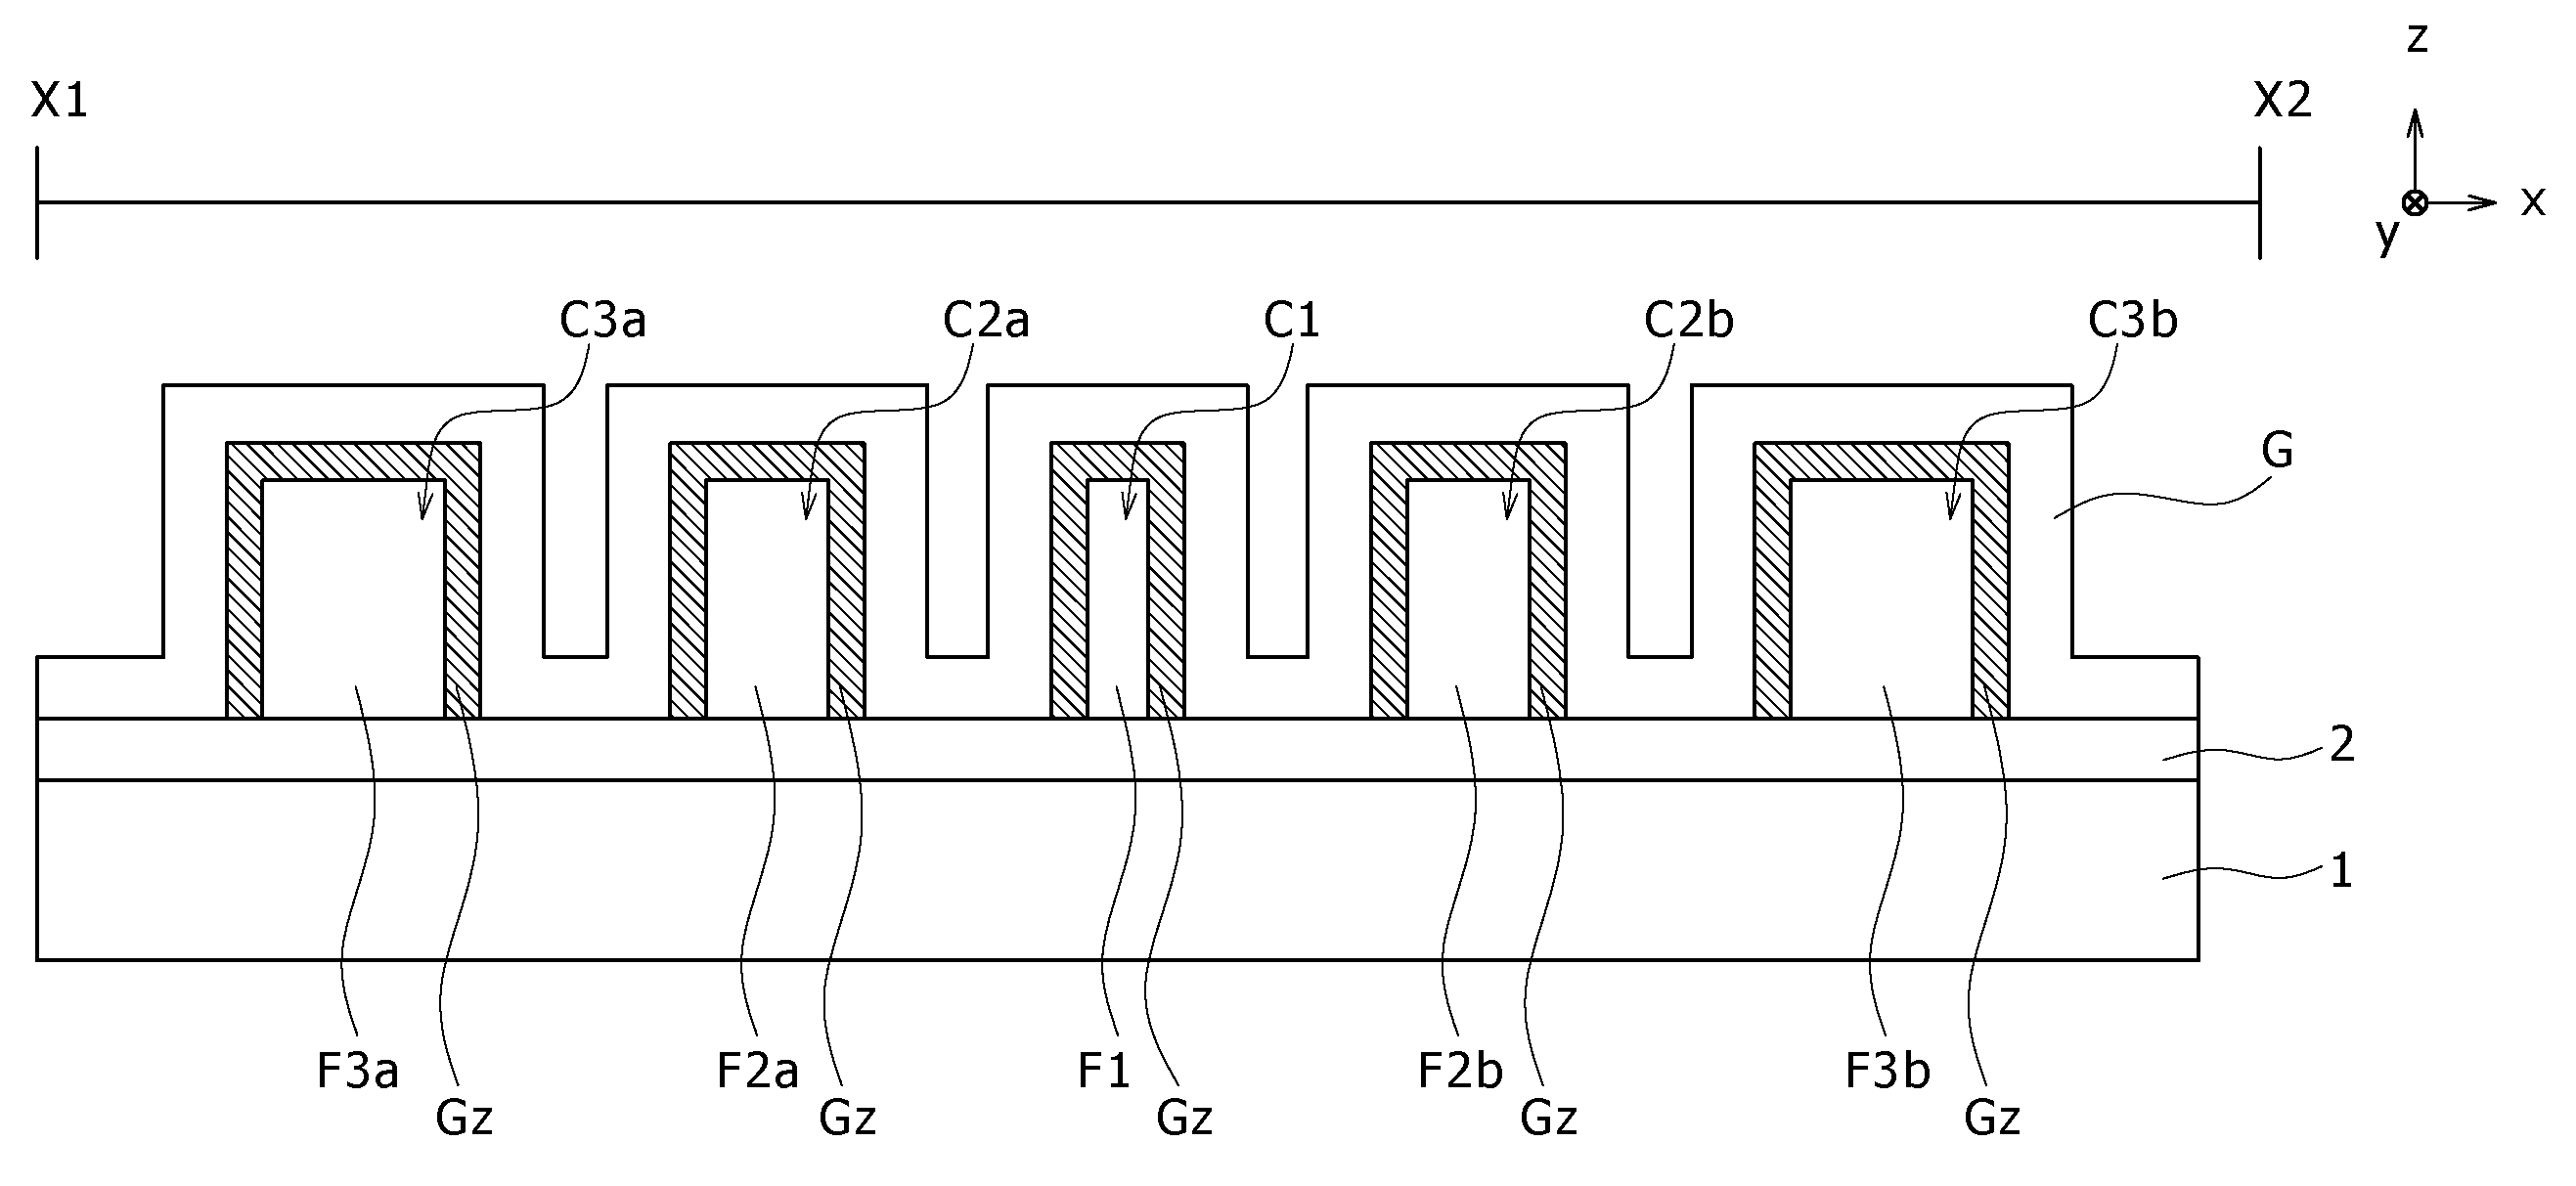 Semiconductor device having a fin field effect transistor